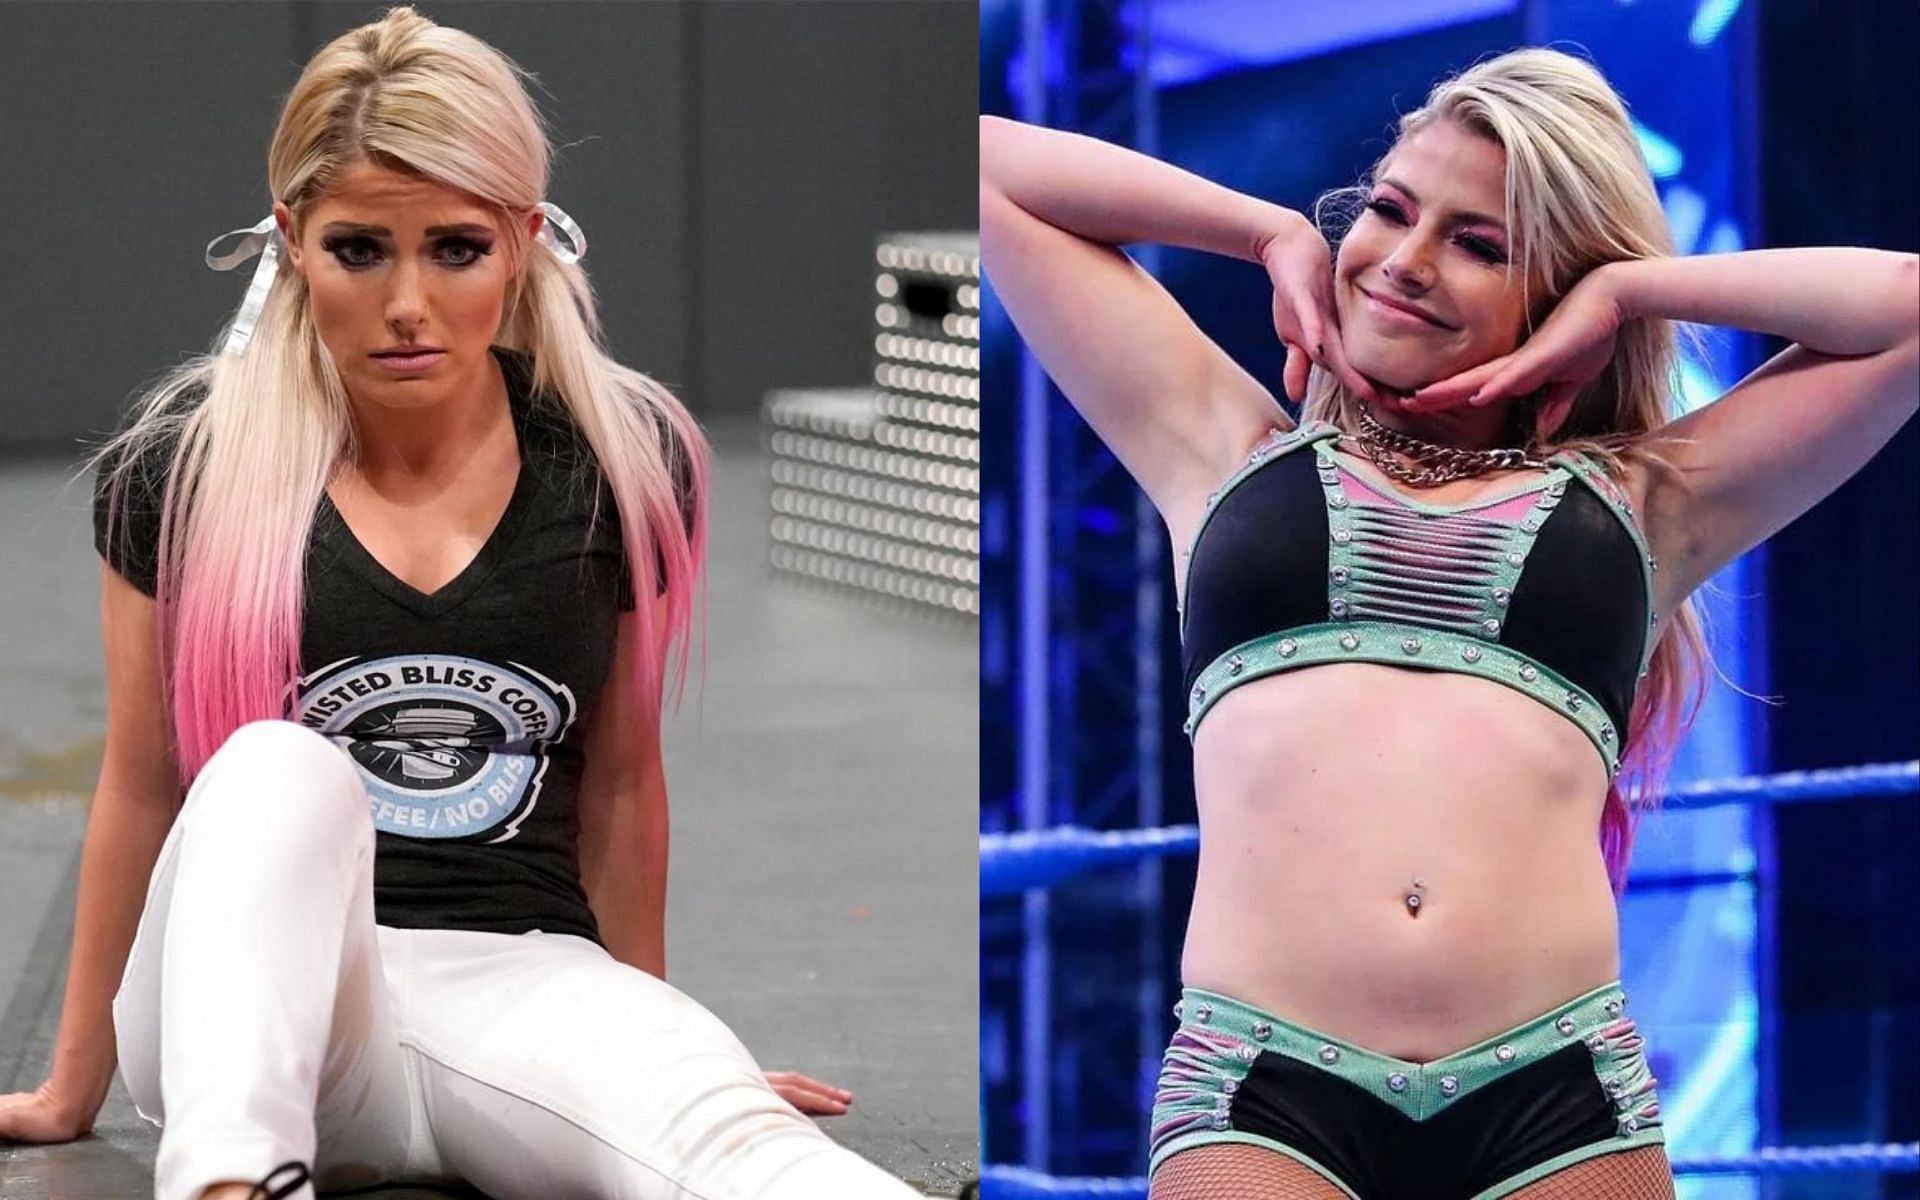 Alexa Bliss has been back for some time now on WWE RAW